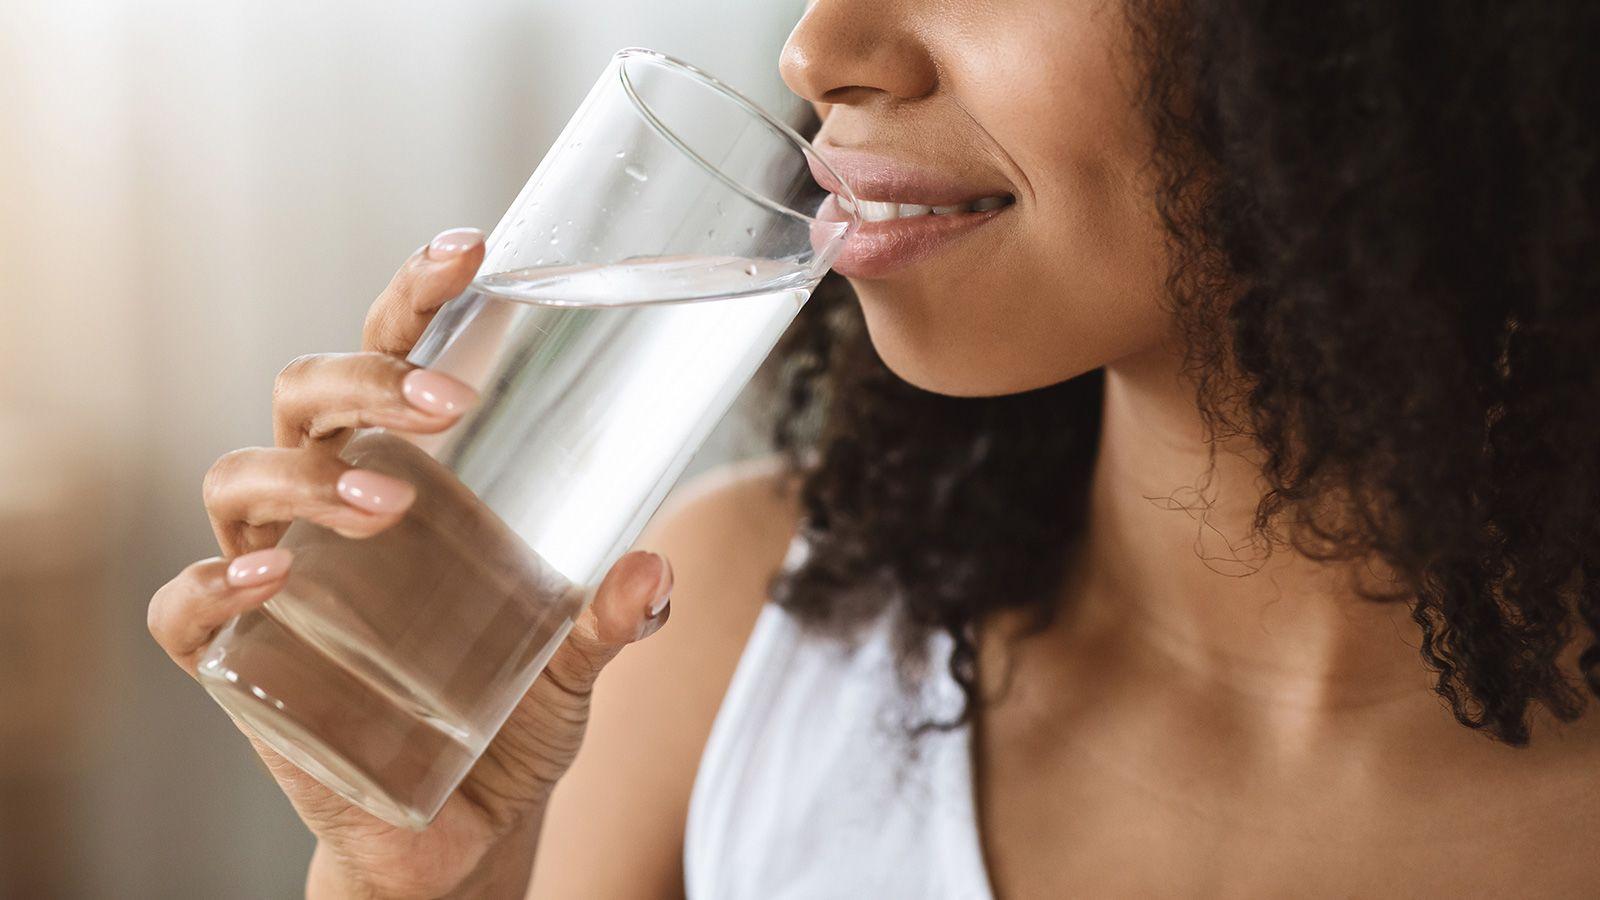 How Much Water Should I Drink While Breastfeeding?